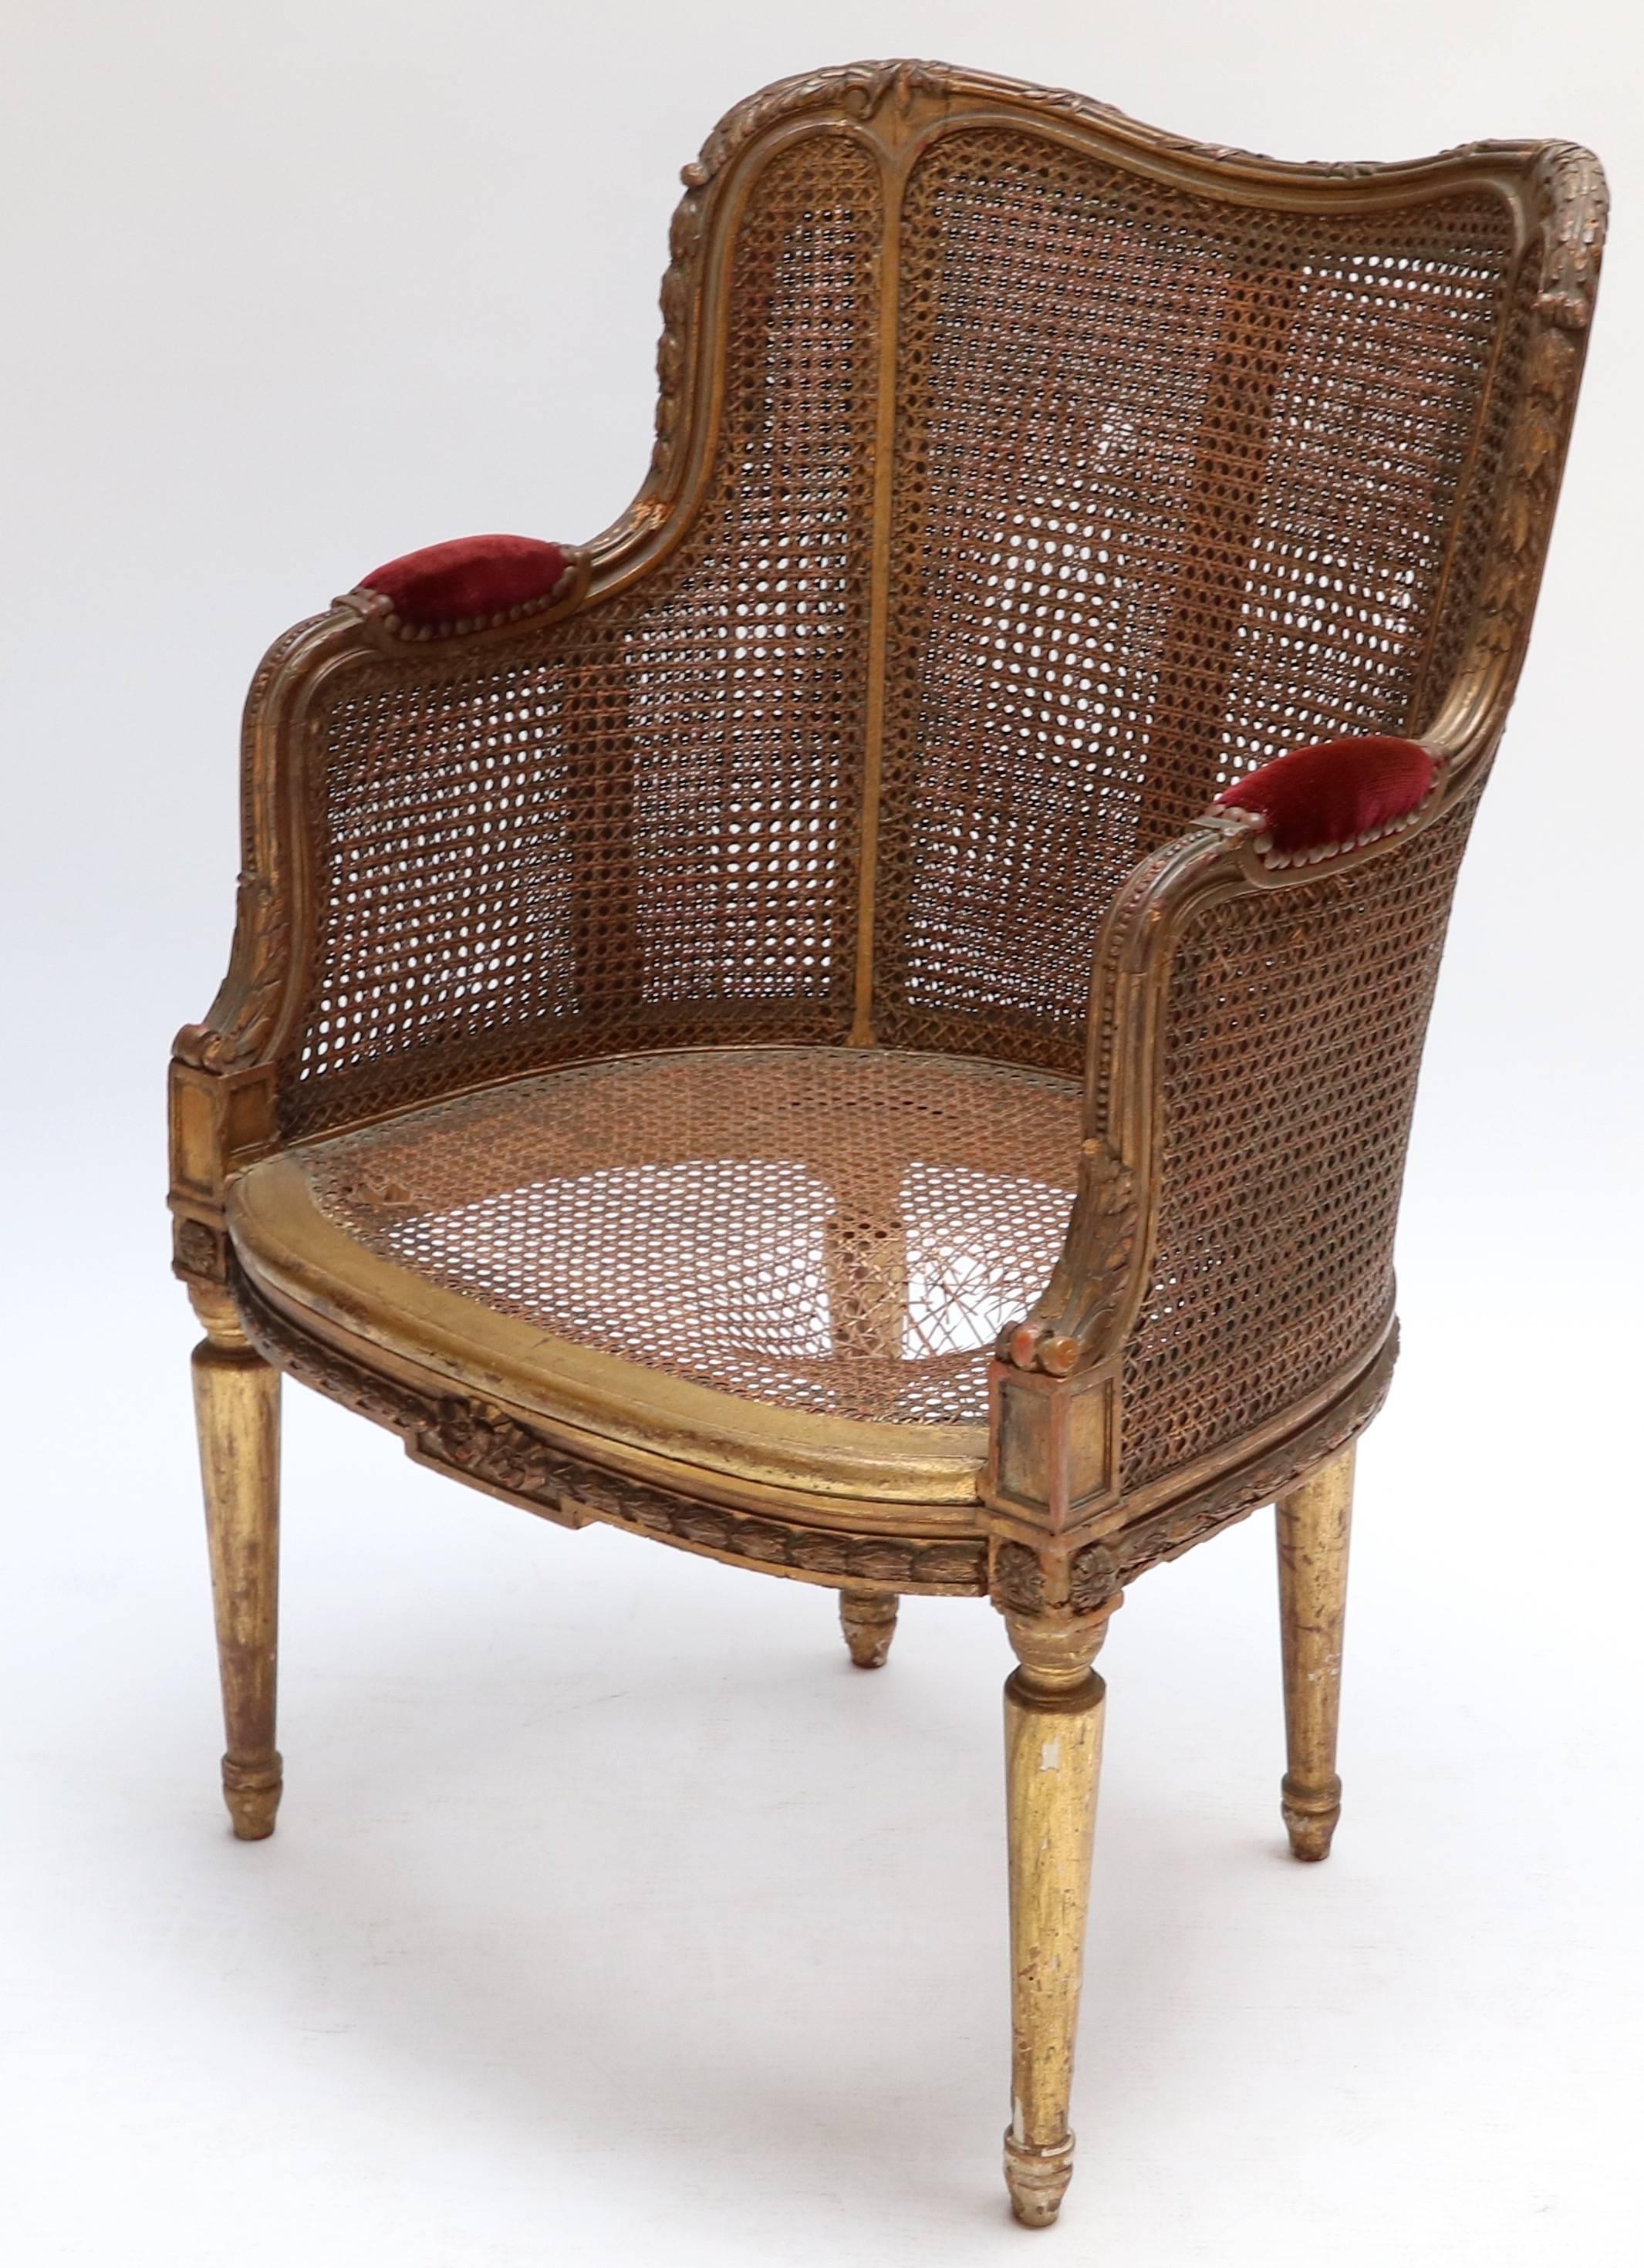 19th century French double caning gilded chair with velvet armrests.

